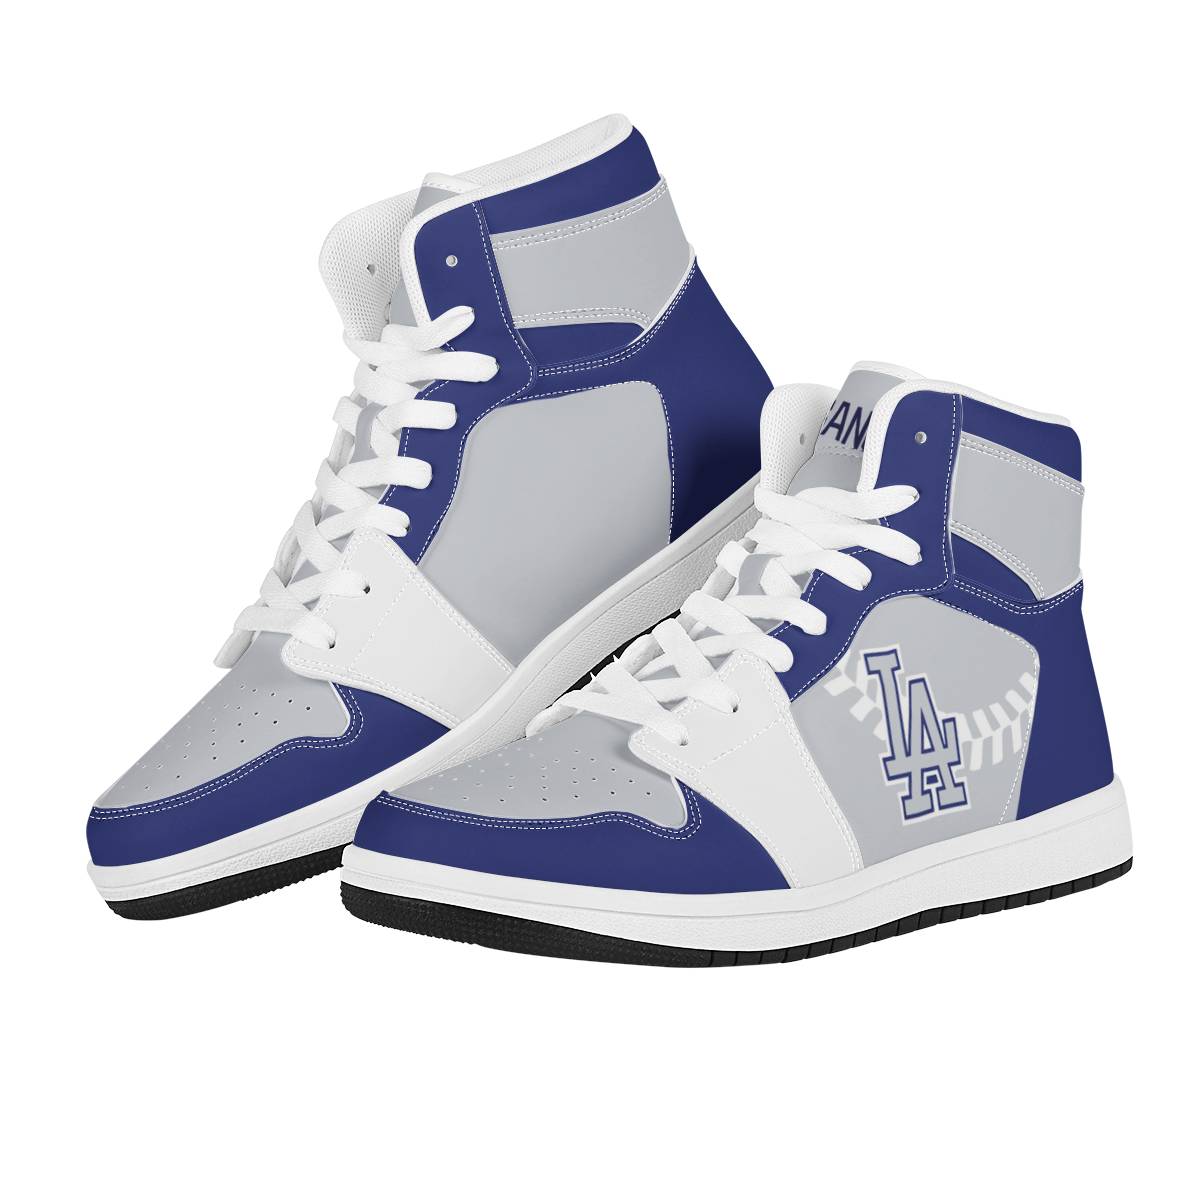 Women's Los Angeles Dodgers High Top Leather AJ1 Sneakers 003